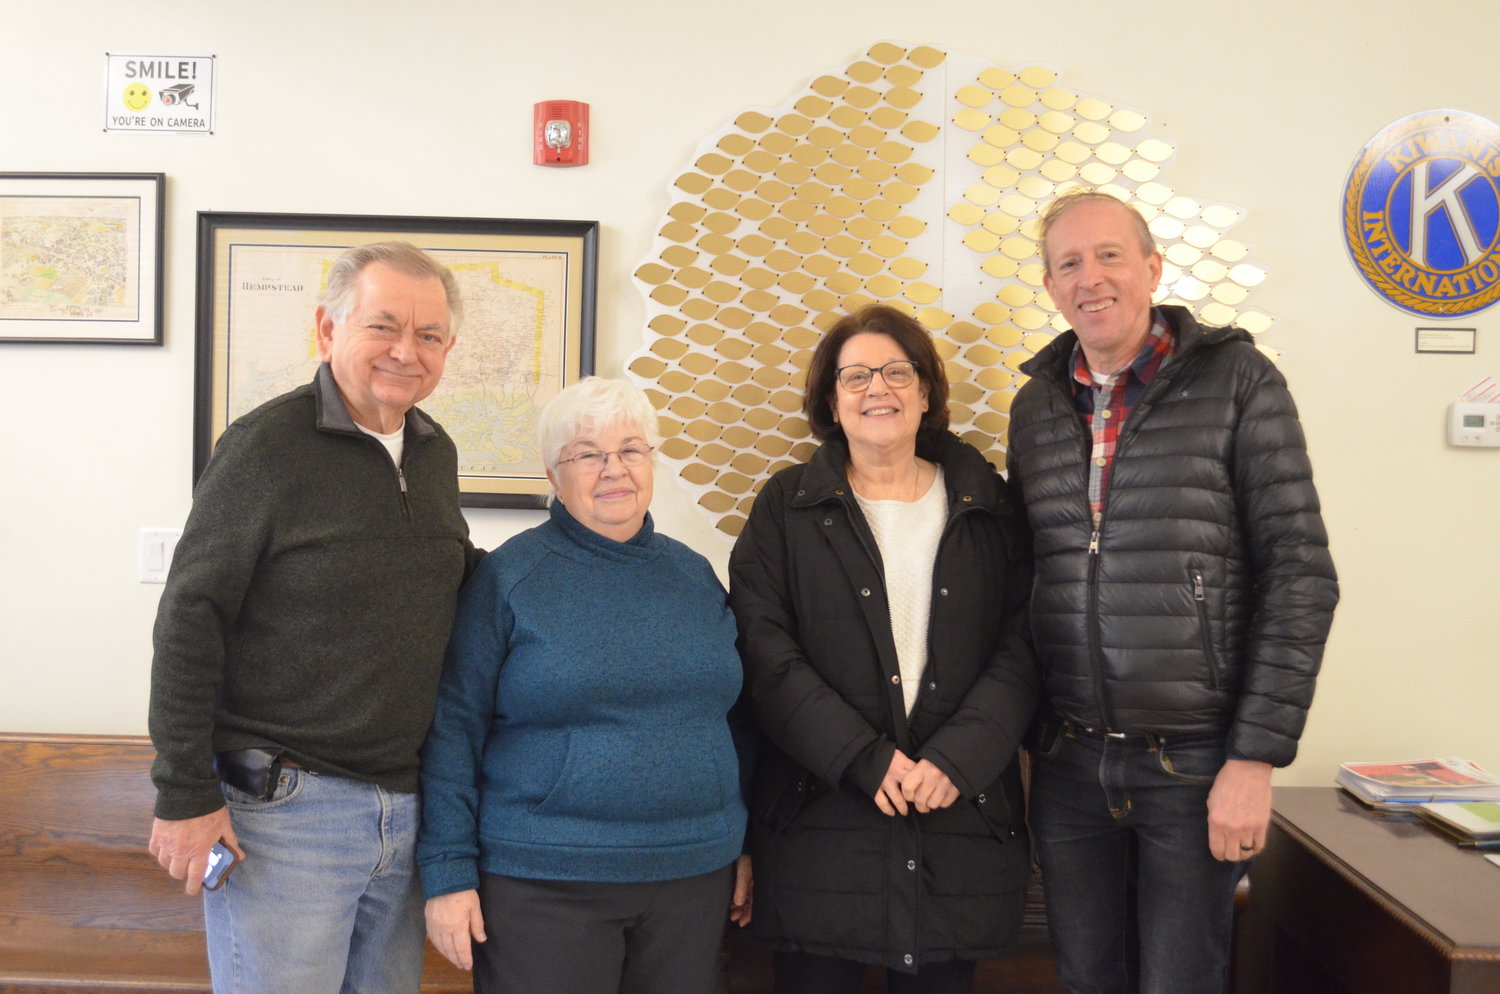 Franklin Square Historical Society members, from left, Bill and Nancy Youngfert, Patricia Realmuto and Paul van Wie have dedicated years of work, as volunteers, to establishing the Franklin Square Museum. Behind them is the donor tree on which they plan to display the names of museum supporters.